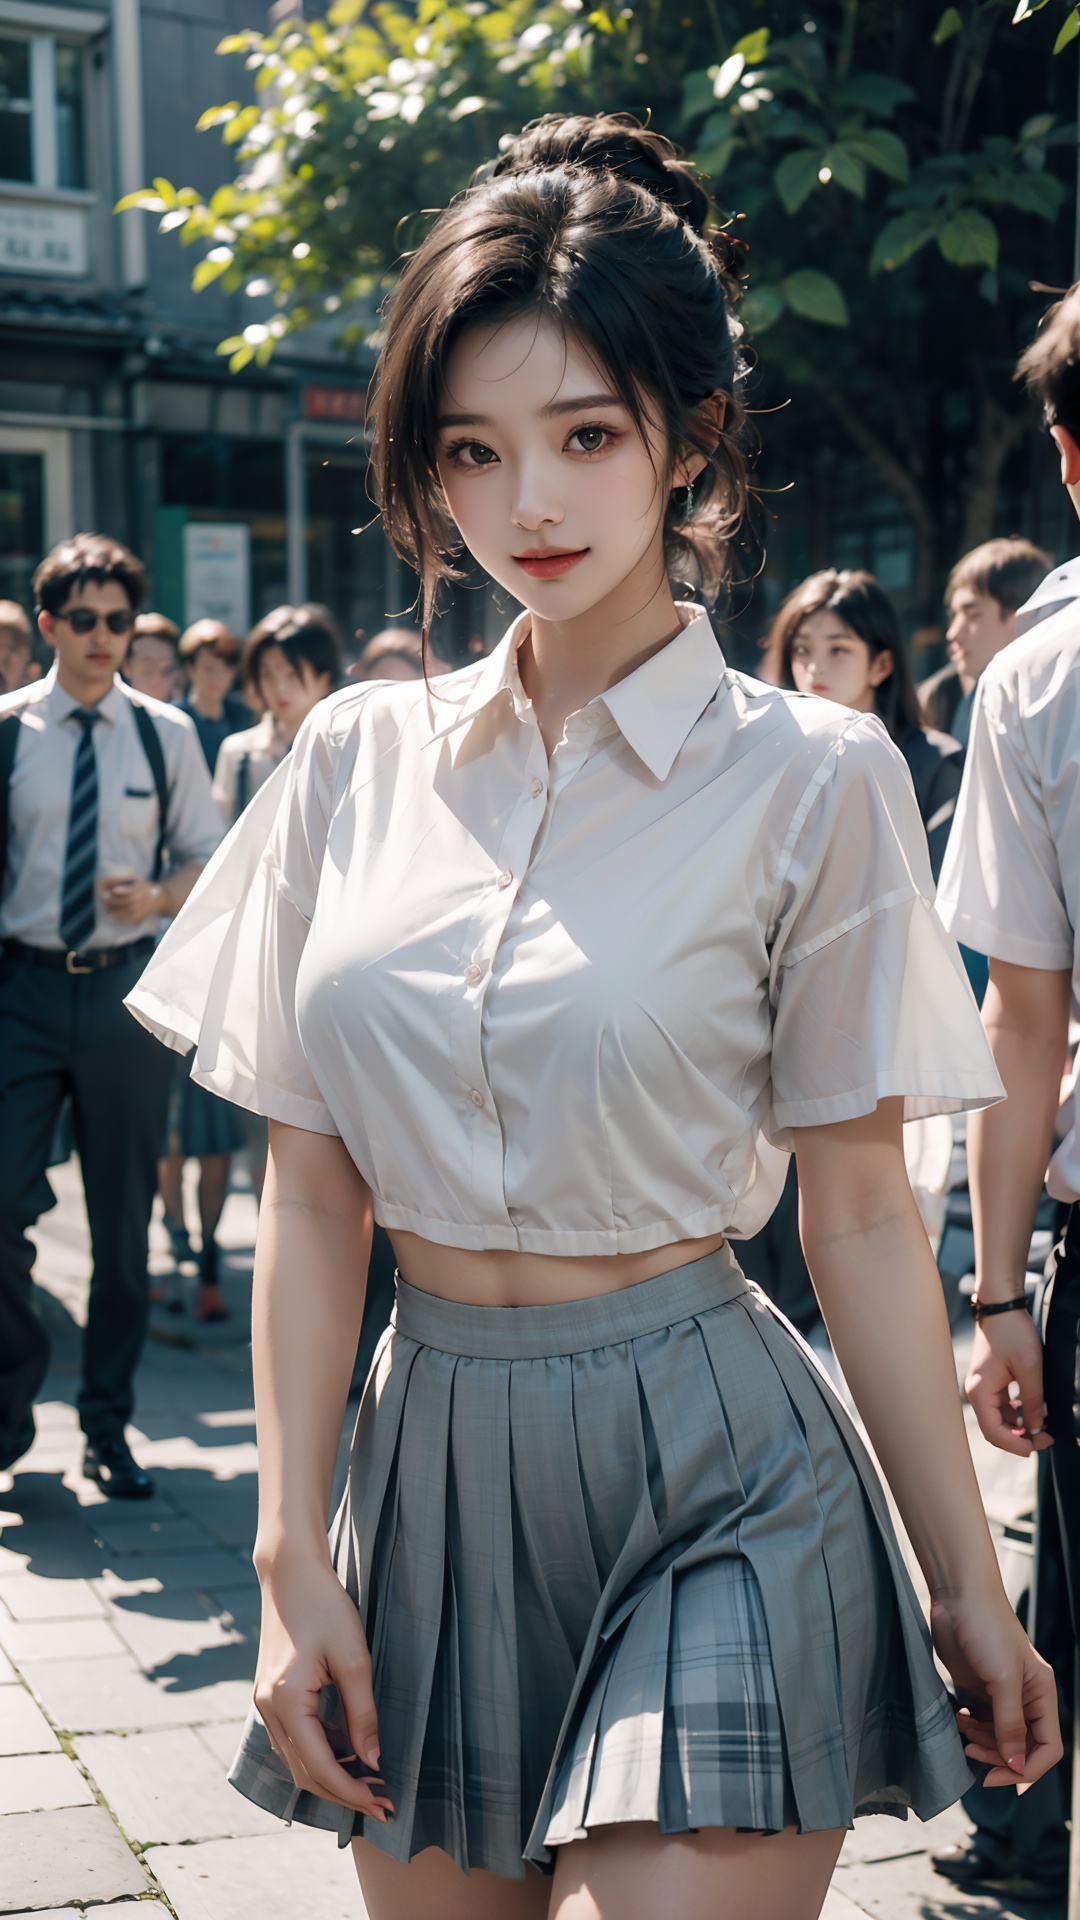  Woman posinginschoolyard、top-quality、女の子1 a person、middlebreasts、tag、with light glowing、blur backgroun、bokeh dof、outside ofhouse、(Street:0.8)、(aperson々、Large crowds:1、A slender、large full breasts、hi-school girl、Clothes that adhere perfectly to the body、White collared shirt、shortsleeves、（Pleated skirt with dark green check)、Floating hair、Long、Forehead:0.8)、Beautiful skywithdetails、耳Nipple Ring、A slender、Sareme、 (above knee)、Soft lighting、the wind、glowy skin、A smile、The wind is blowing、